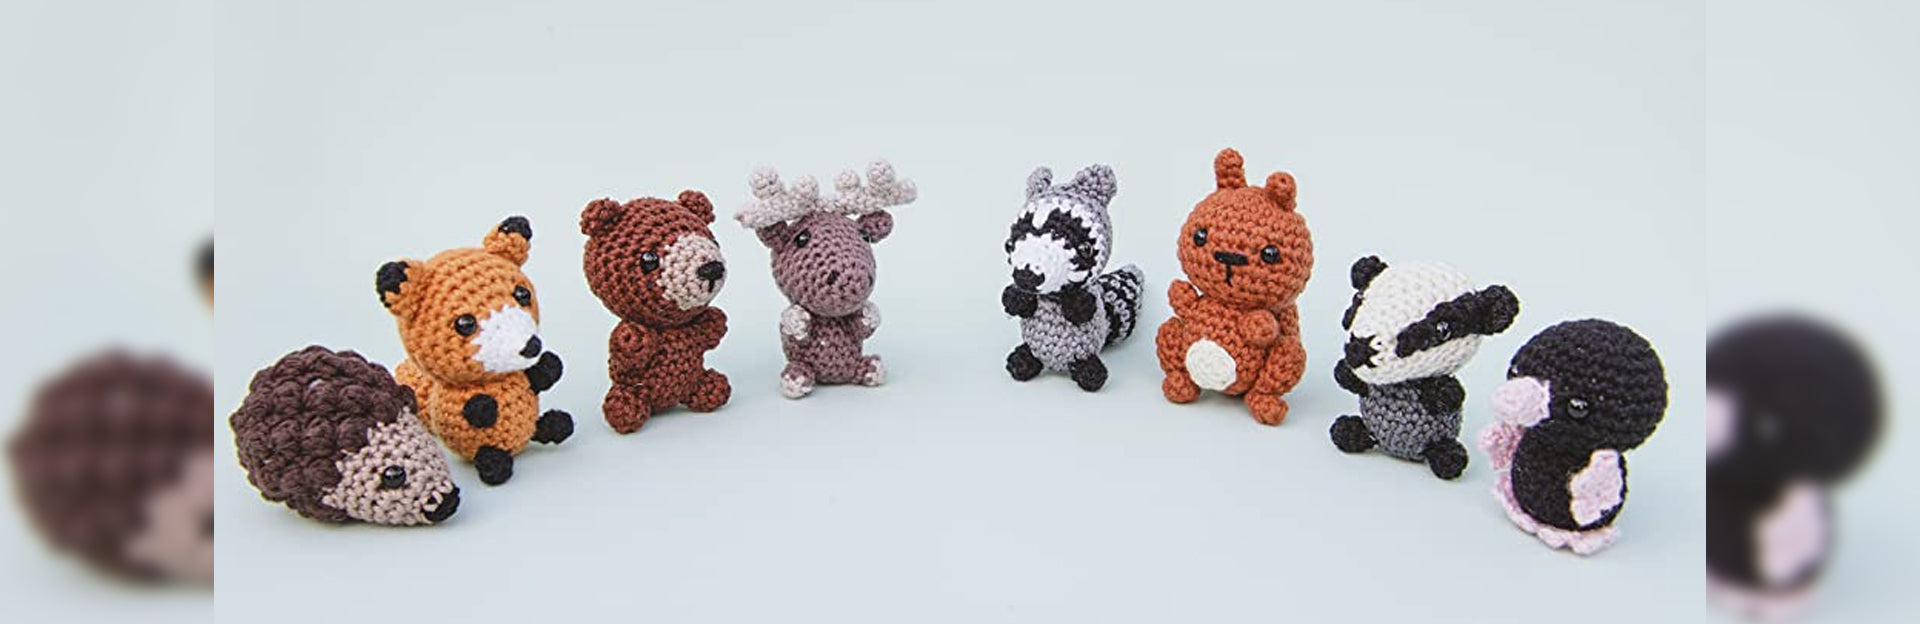 Cute and Safe amigurumi knit patterns, Perfect for Gifting